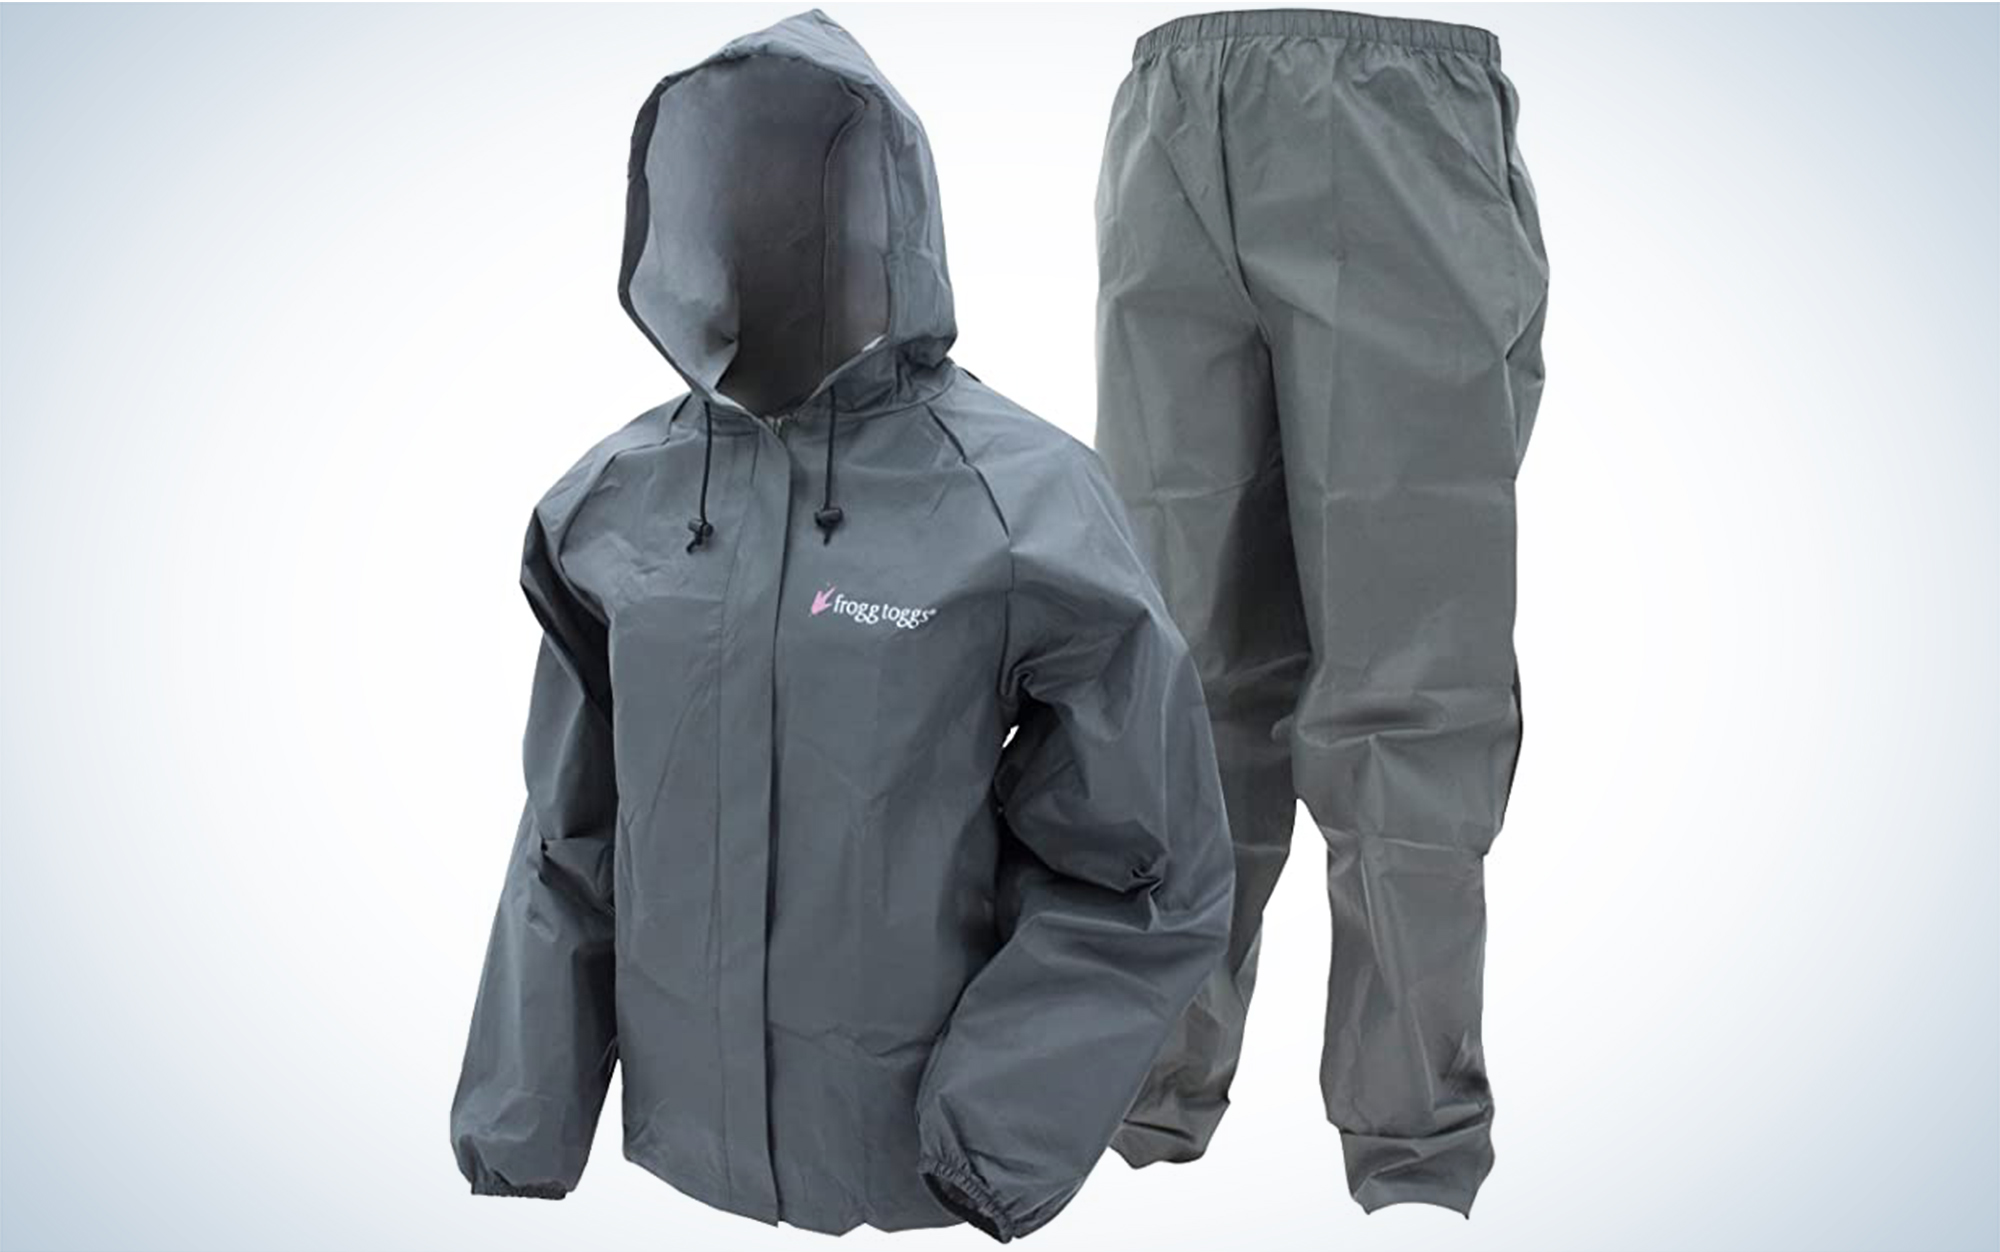 The Frogg Toggs Ultra-Lite Suit is the best budget rain gear.